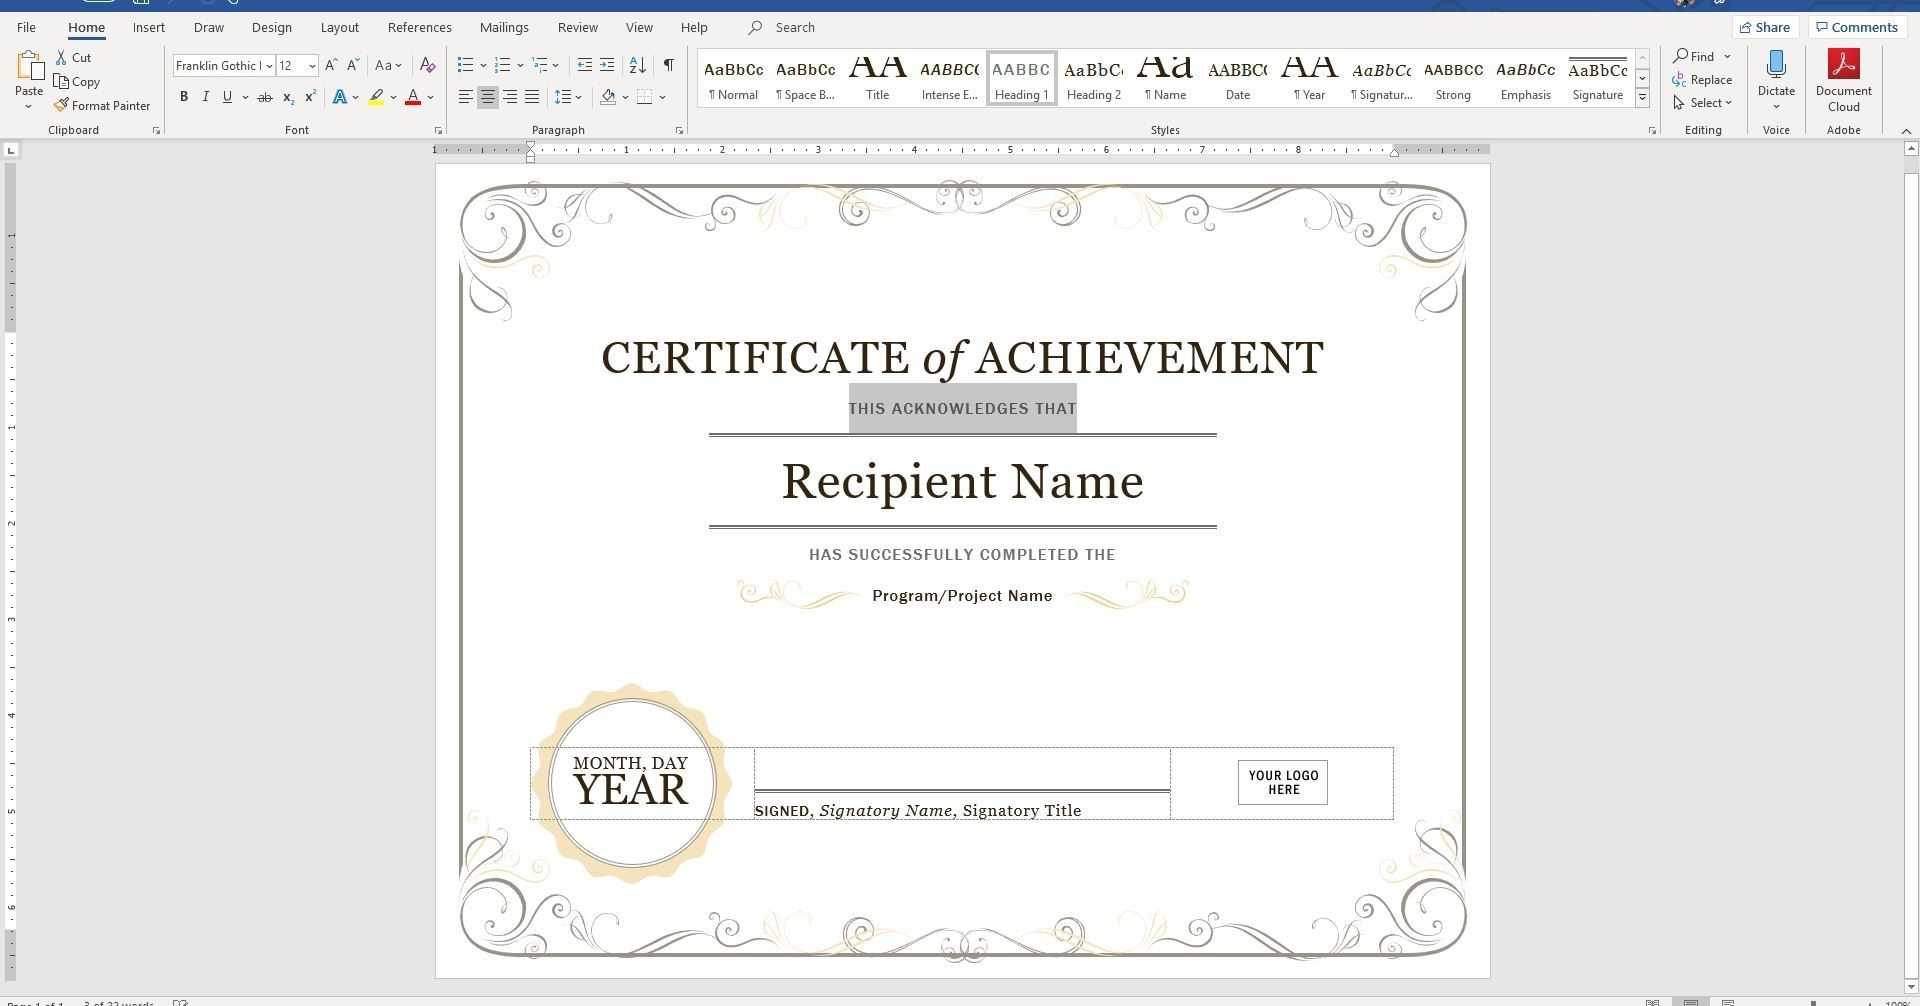 Certificate Template In Word | Safebest.xyz In Downloadable Certificate Templates For Microsoft Word